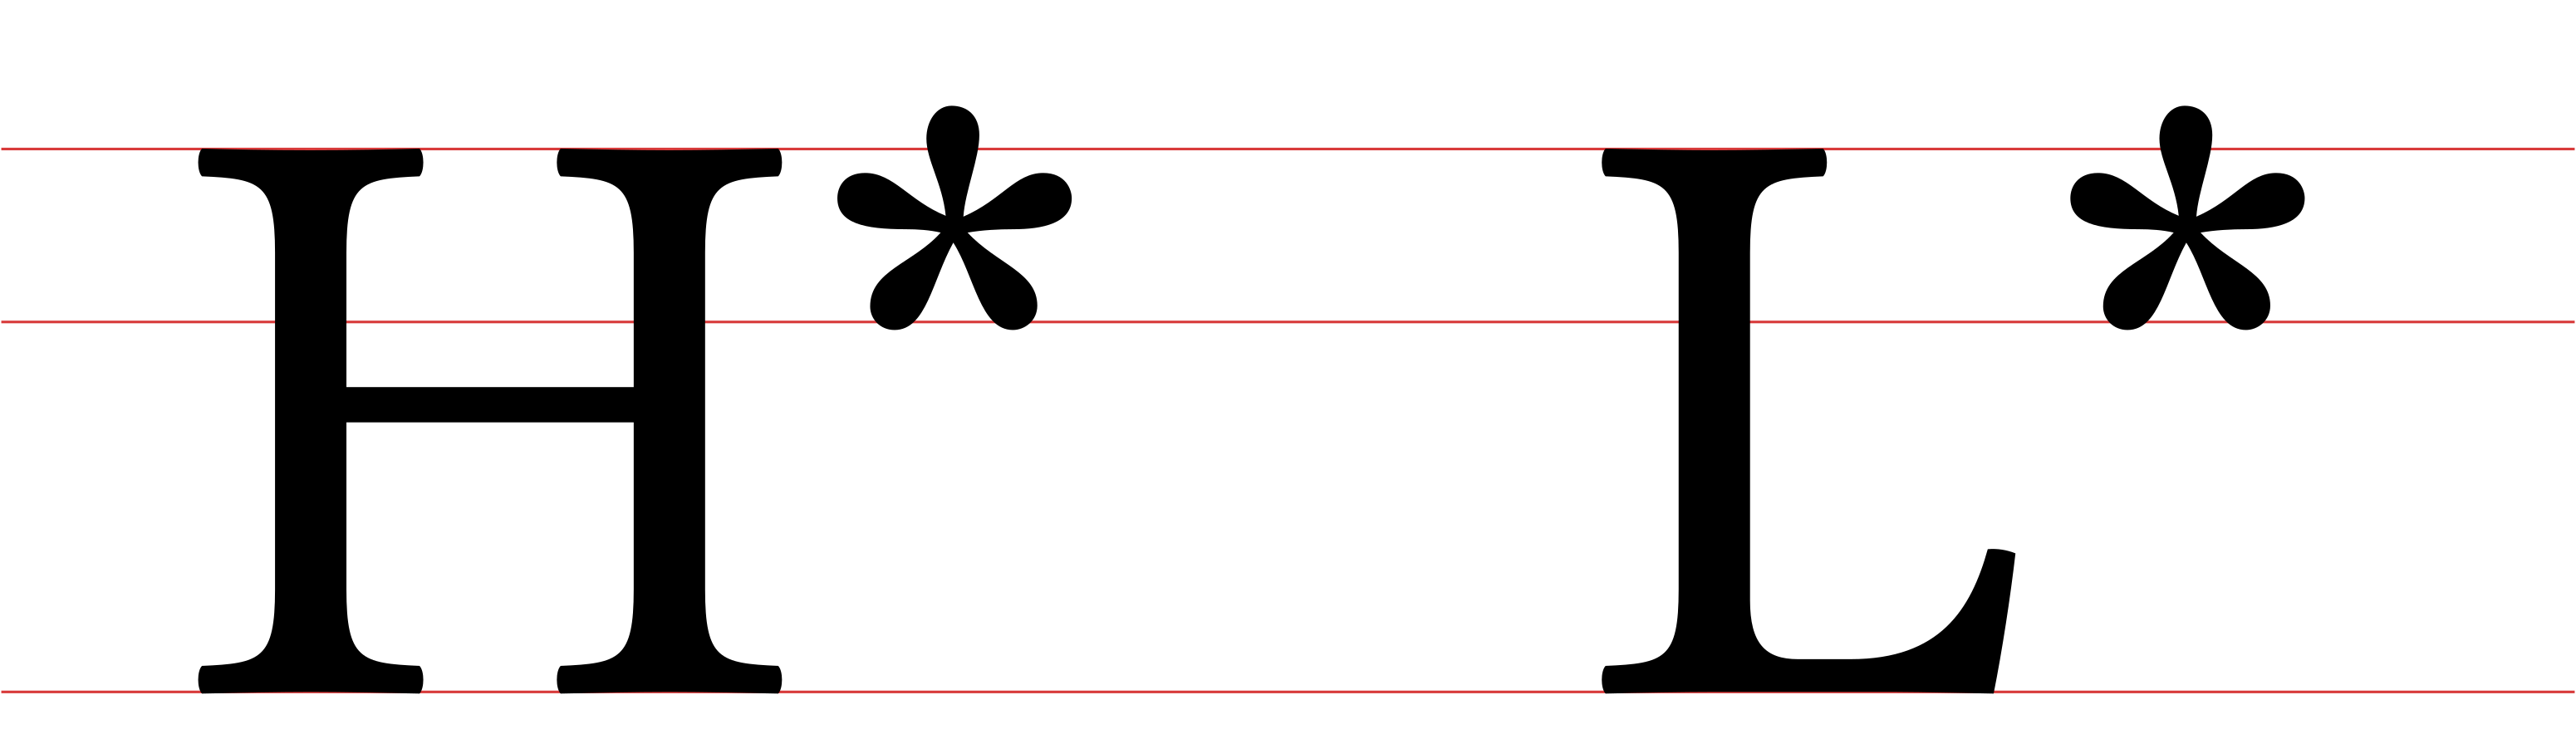 A sample of the basic tone markers in ToBI: a H* and a L* tones,
 with red lines marking the baseline, the median, and the ascender height